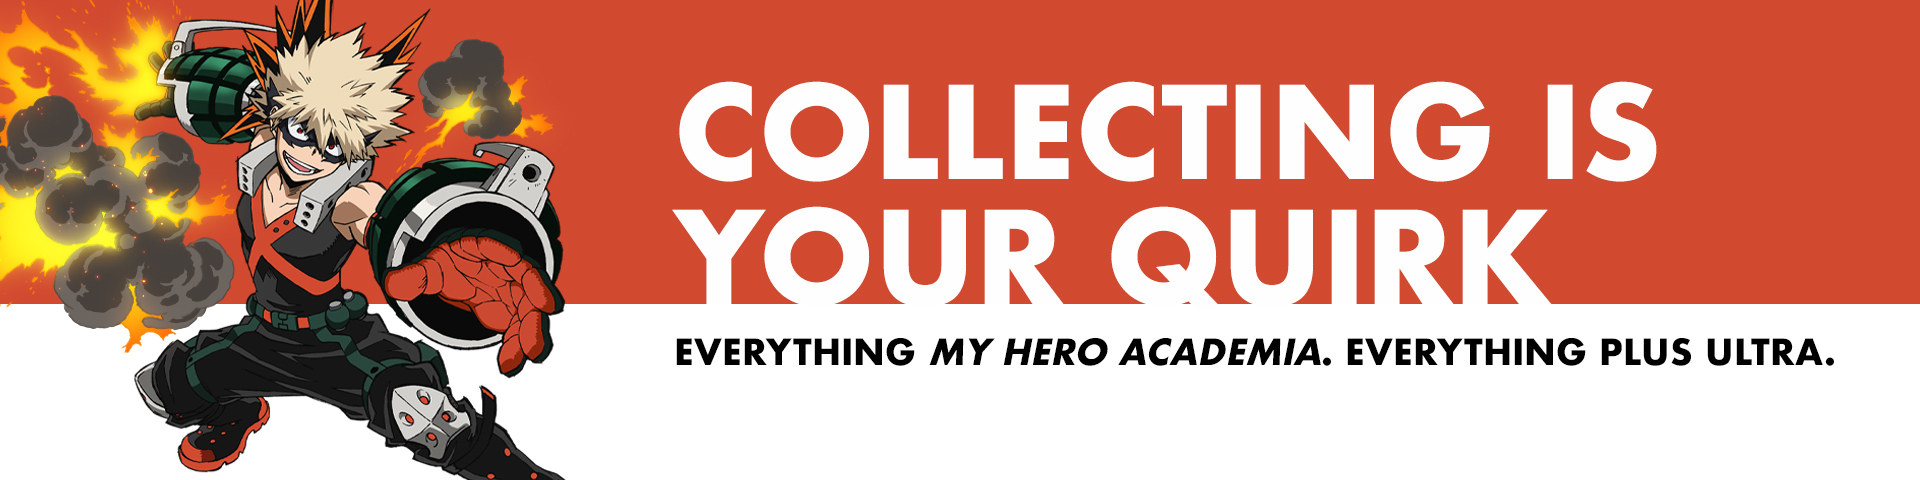 Collecting Is Your Quirk. Everything My Hero Academia. Everything Plus Ultra.